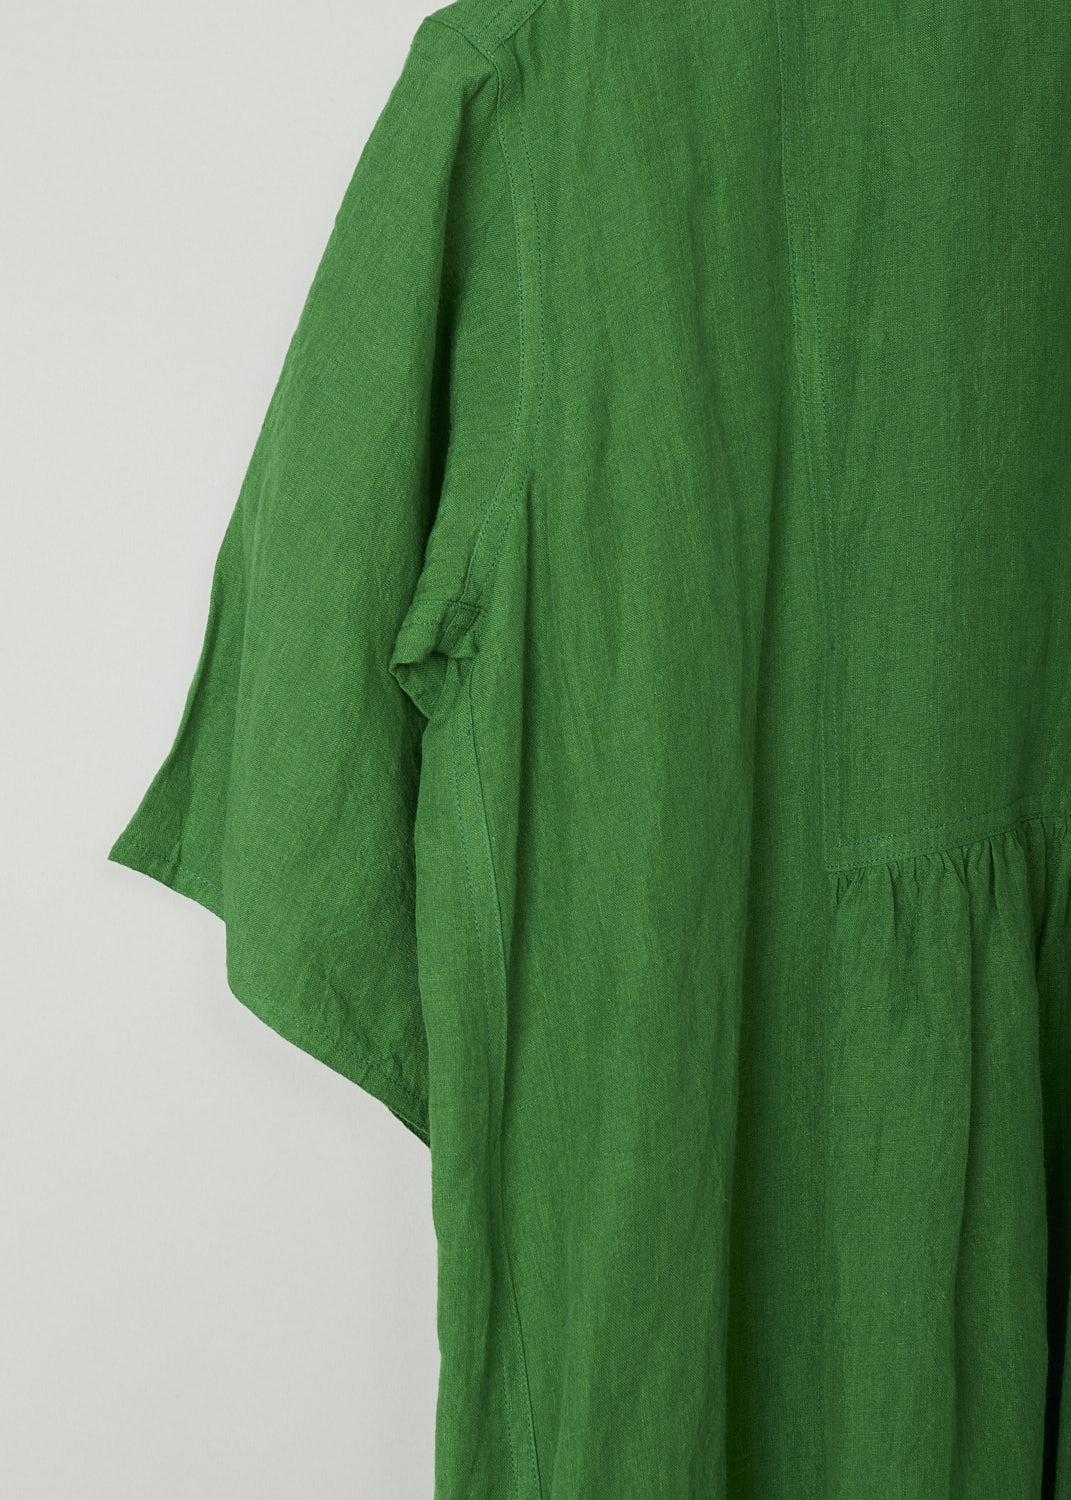 SOFIE Dâ€™HOORE, BRIGHT GREEN LINEN DARNELLE DRESS, DARNELLE_LIFE_GRASS, Green, Detail, This oversized green midi dress features a round neckline, dropped shoulders and short sleeves. The A-line dress has a square bib-like front with pleated details below. Concealed in the side seams, slanted pockets can be found. The dress has a straight hemline with slits on either side. 

